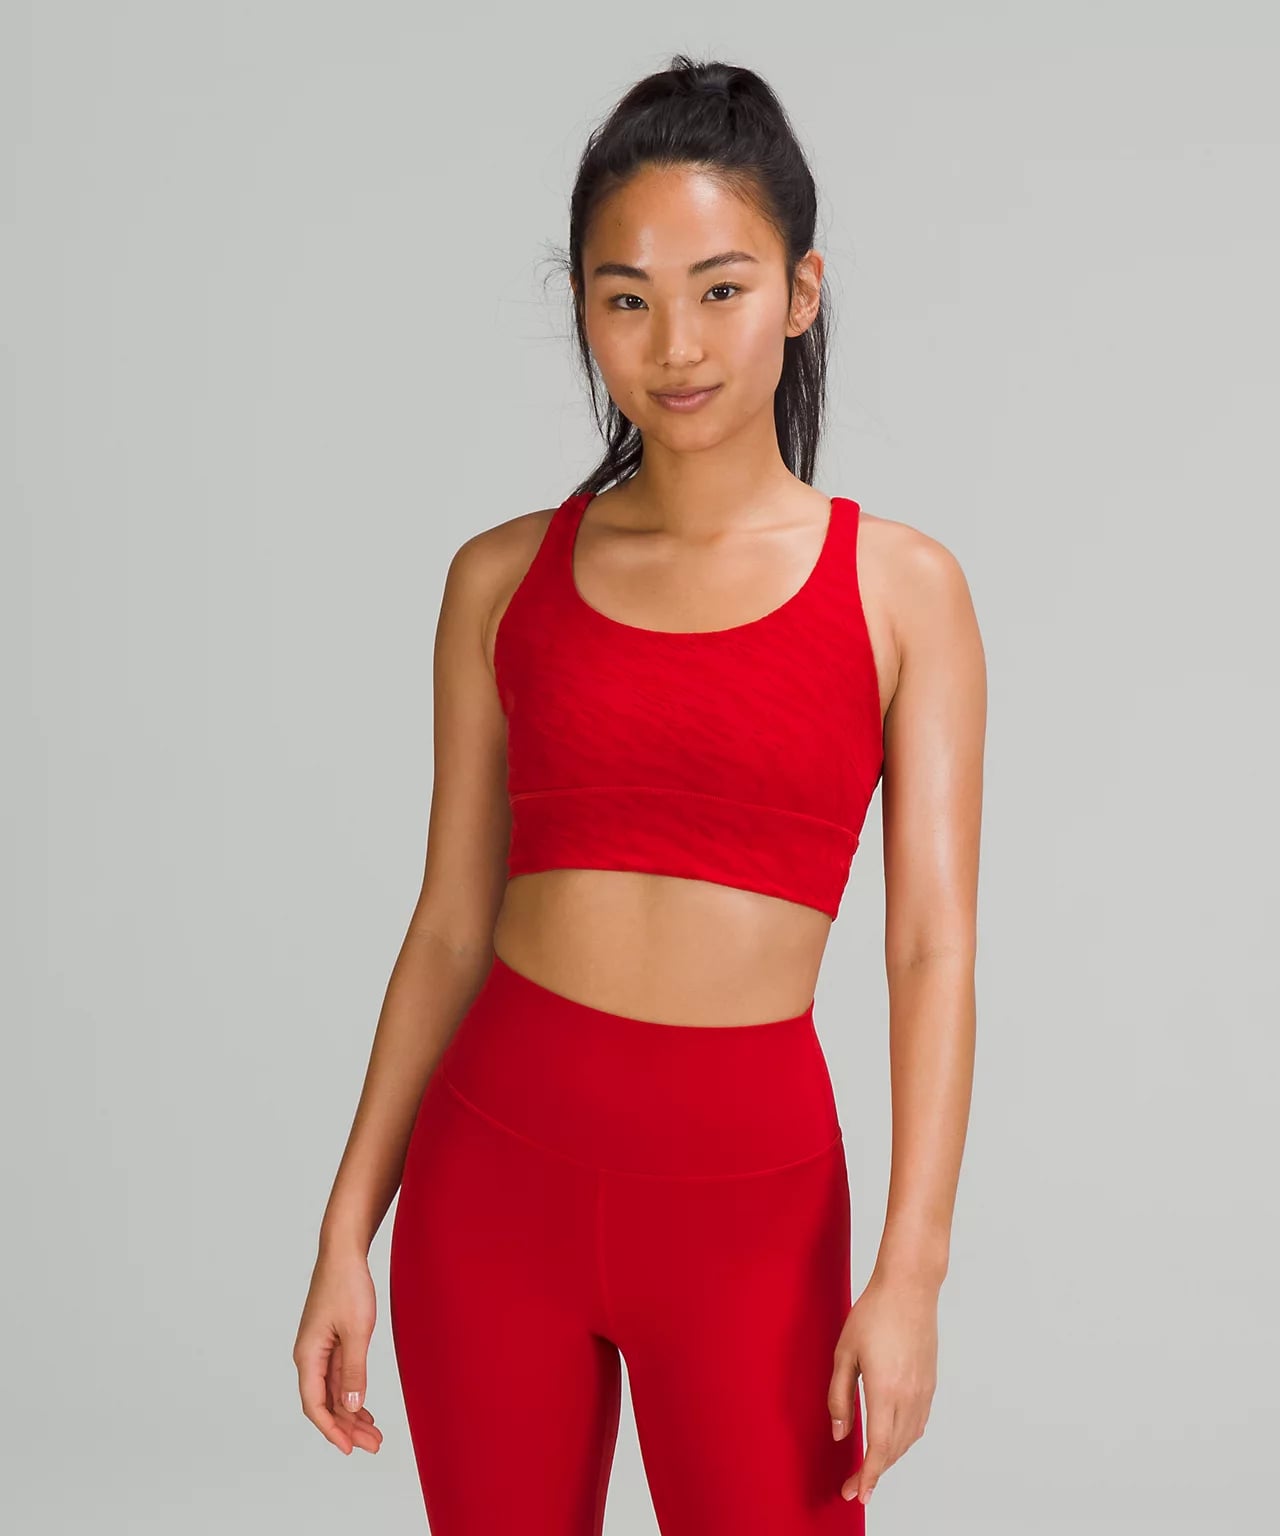 A Red Jacket: lululemon Lunar New Year Hooded Define Jacket Nulu, Celebrate the Year of the Tiger With Lululemon's Lunar New Year Collection